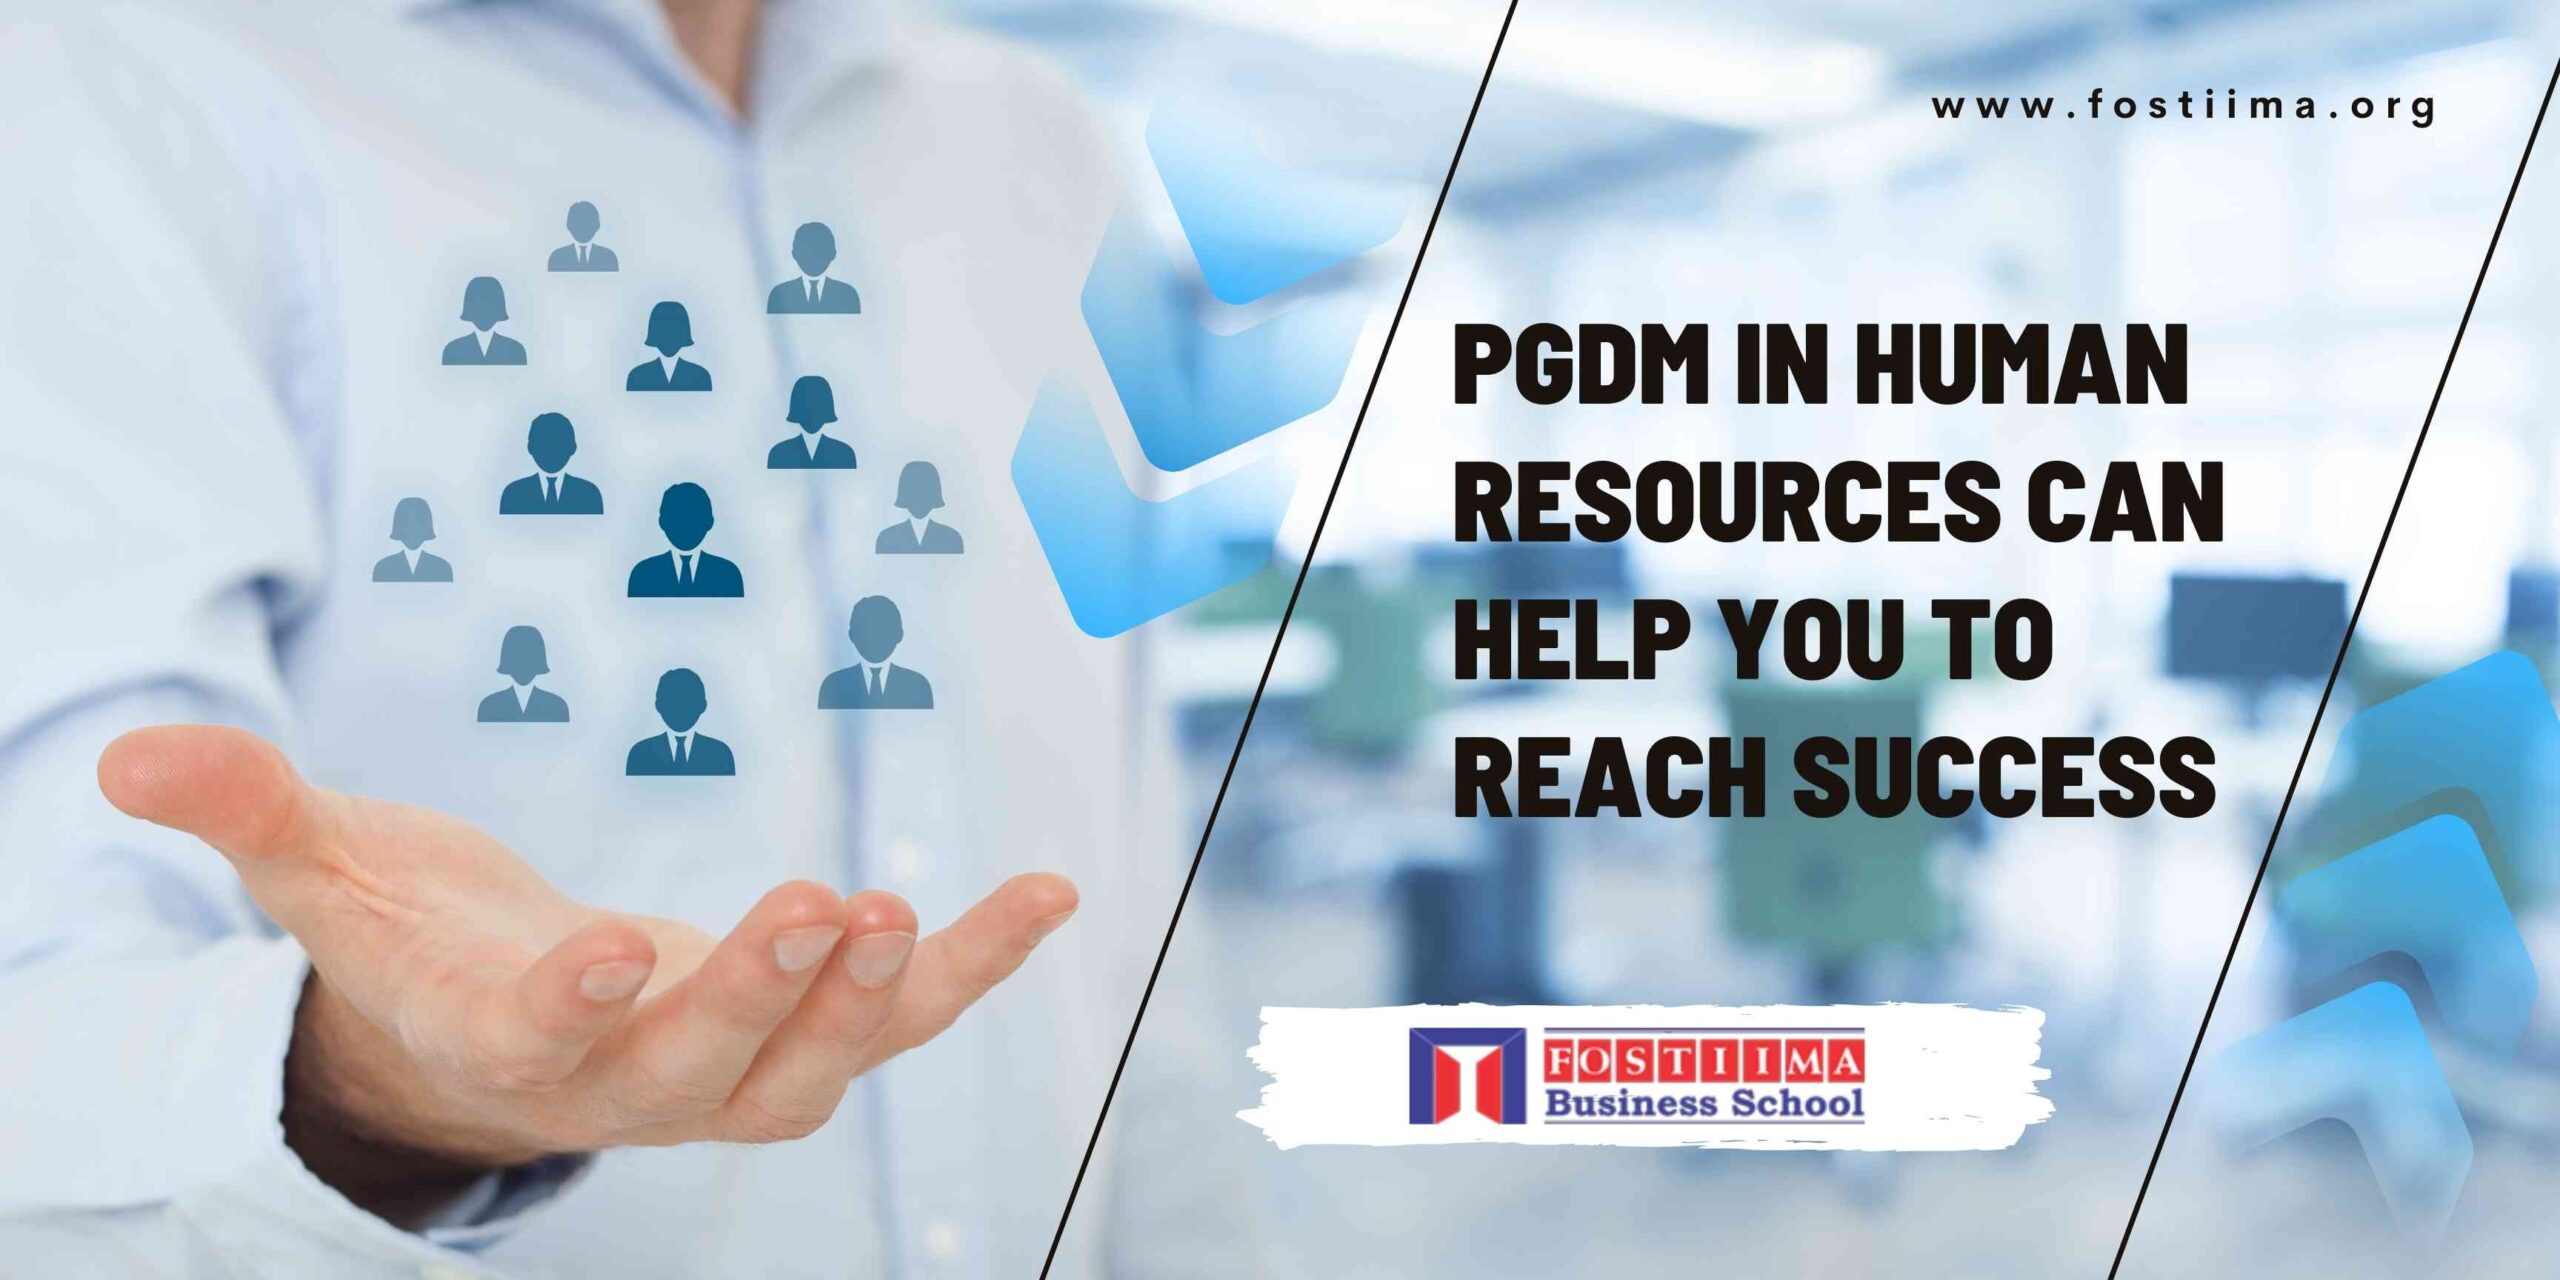 PGDM in Human Resources